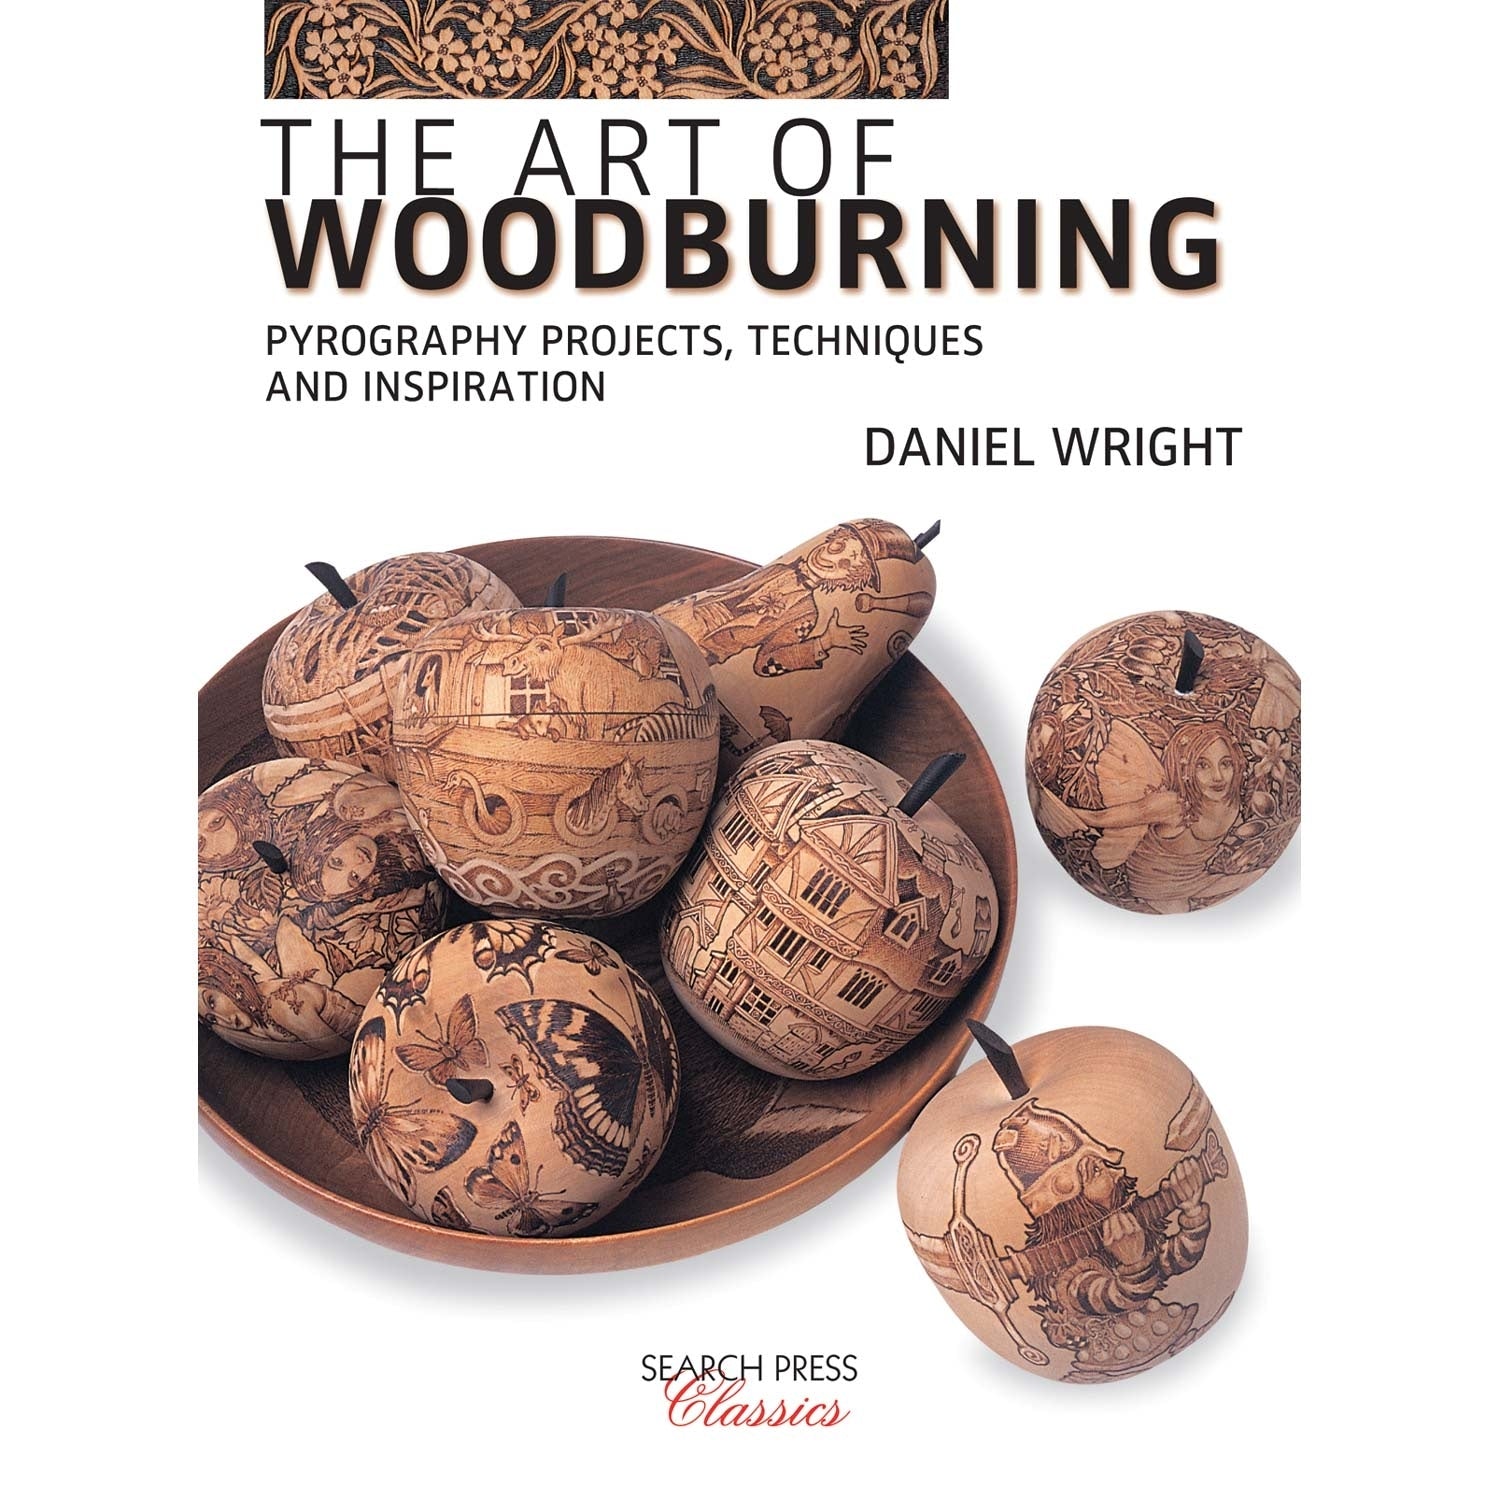 Search Press Books - The Art of Woodburning